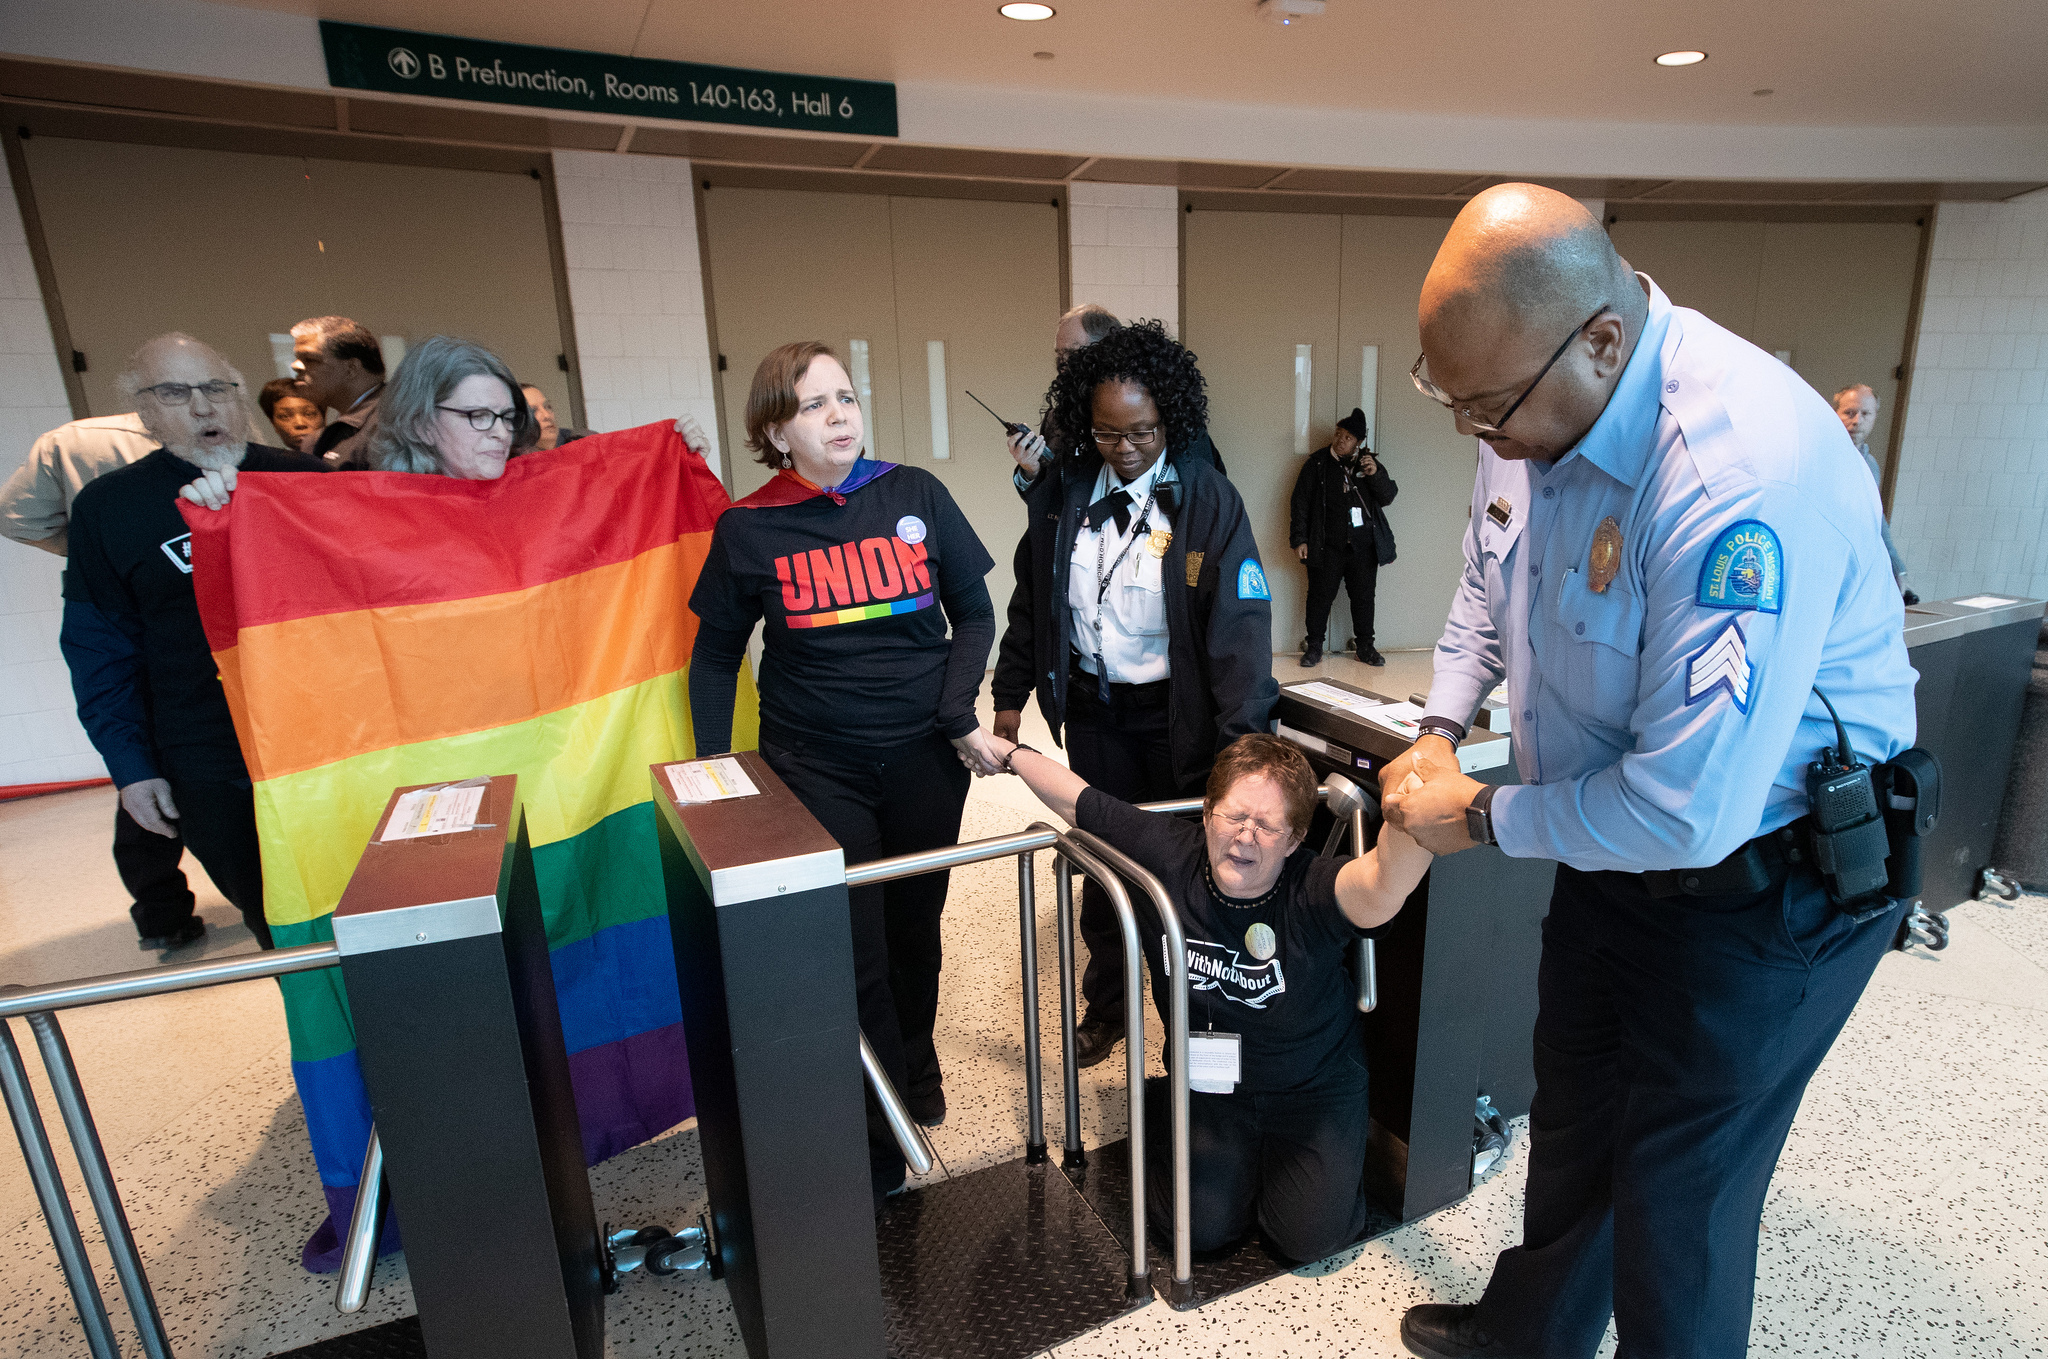 A St. Louis police officer pulls Carol Scott through a turnstile barricade in the Dome at America's Center in St. Louis, site of the 2019 United Methodist General Conference. Scott, a member of the Church of Saint Paul and Saint Andrew in New York, joined other supporters of full inclusion for LGBTQ persons in the life of The United Methodist Church in a protest outside the legislative assembly. Photo by Mike DuBose, UMNS.